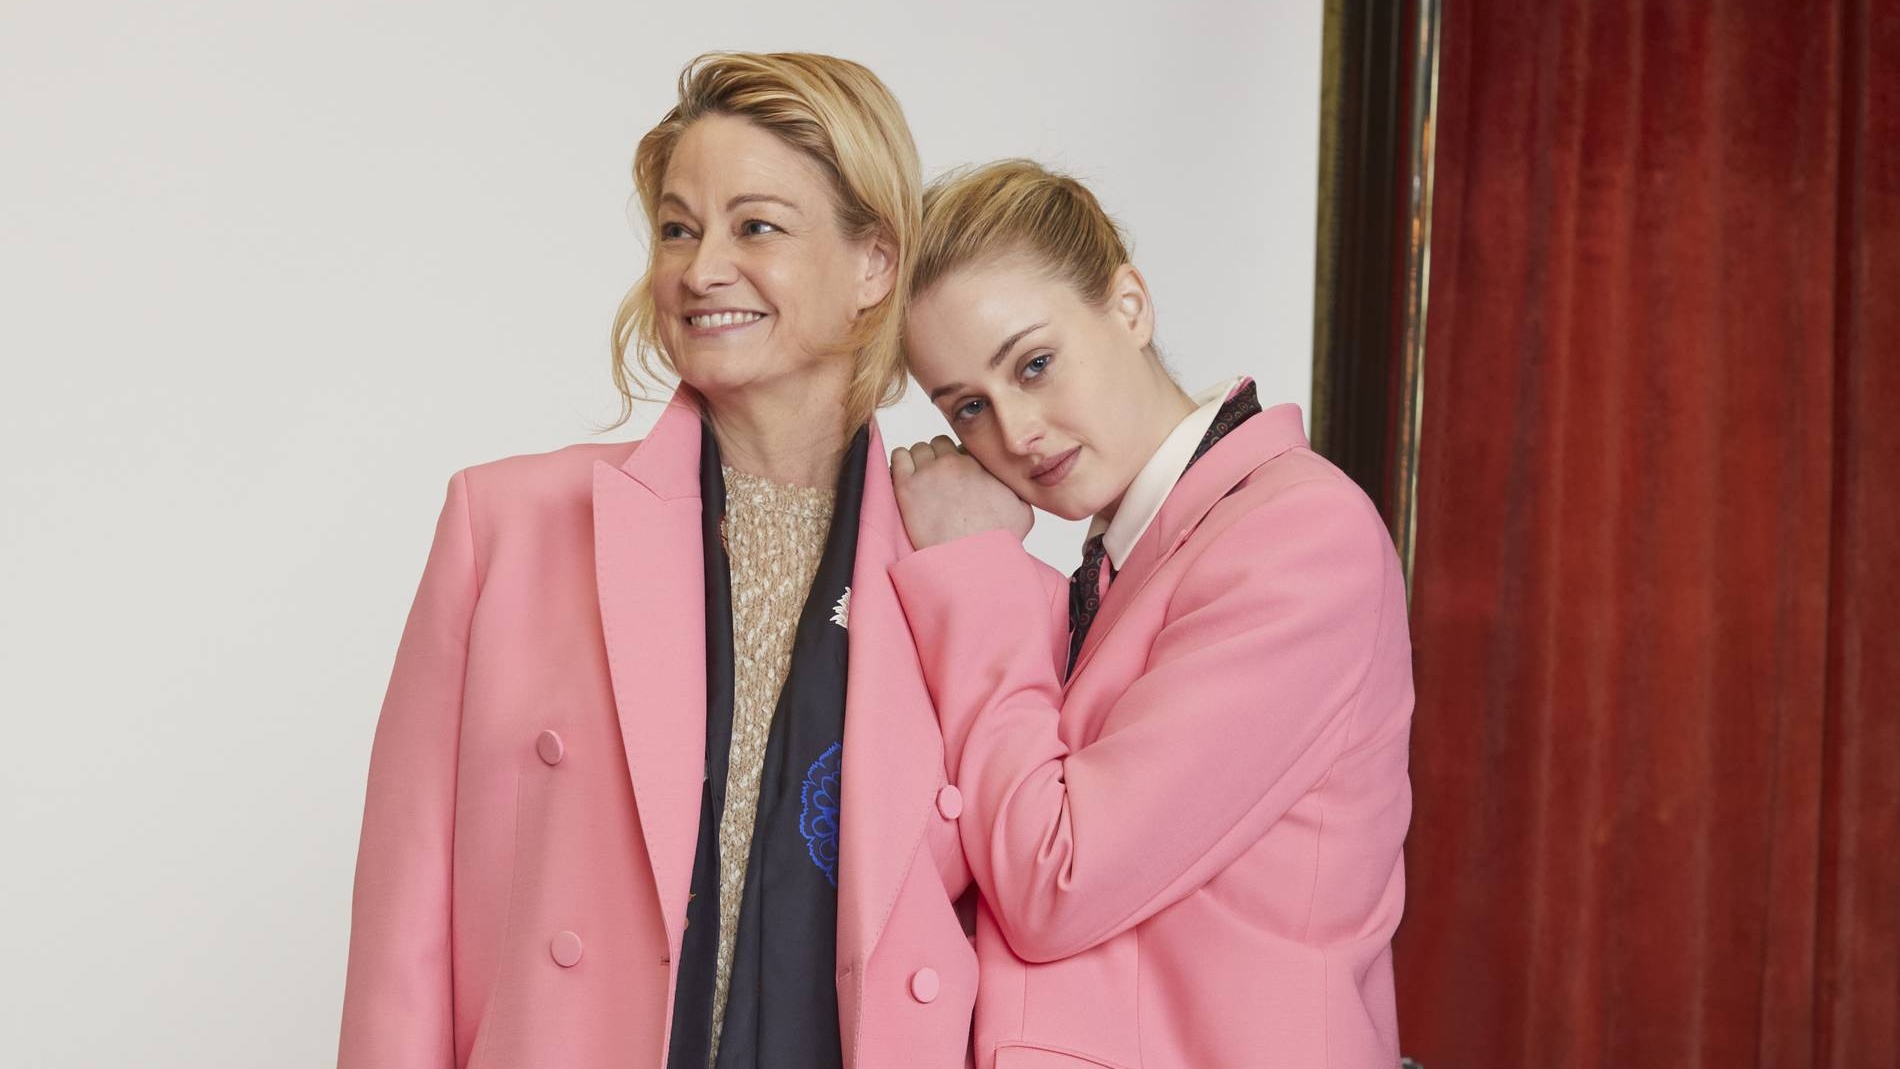 anna and wendy van patten model for lafayette 148